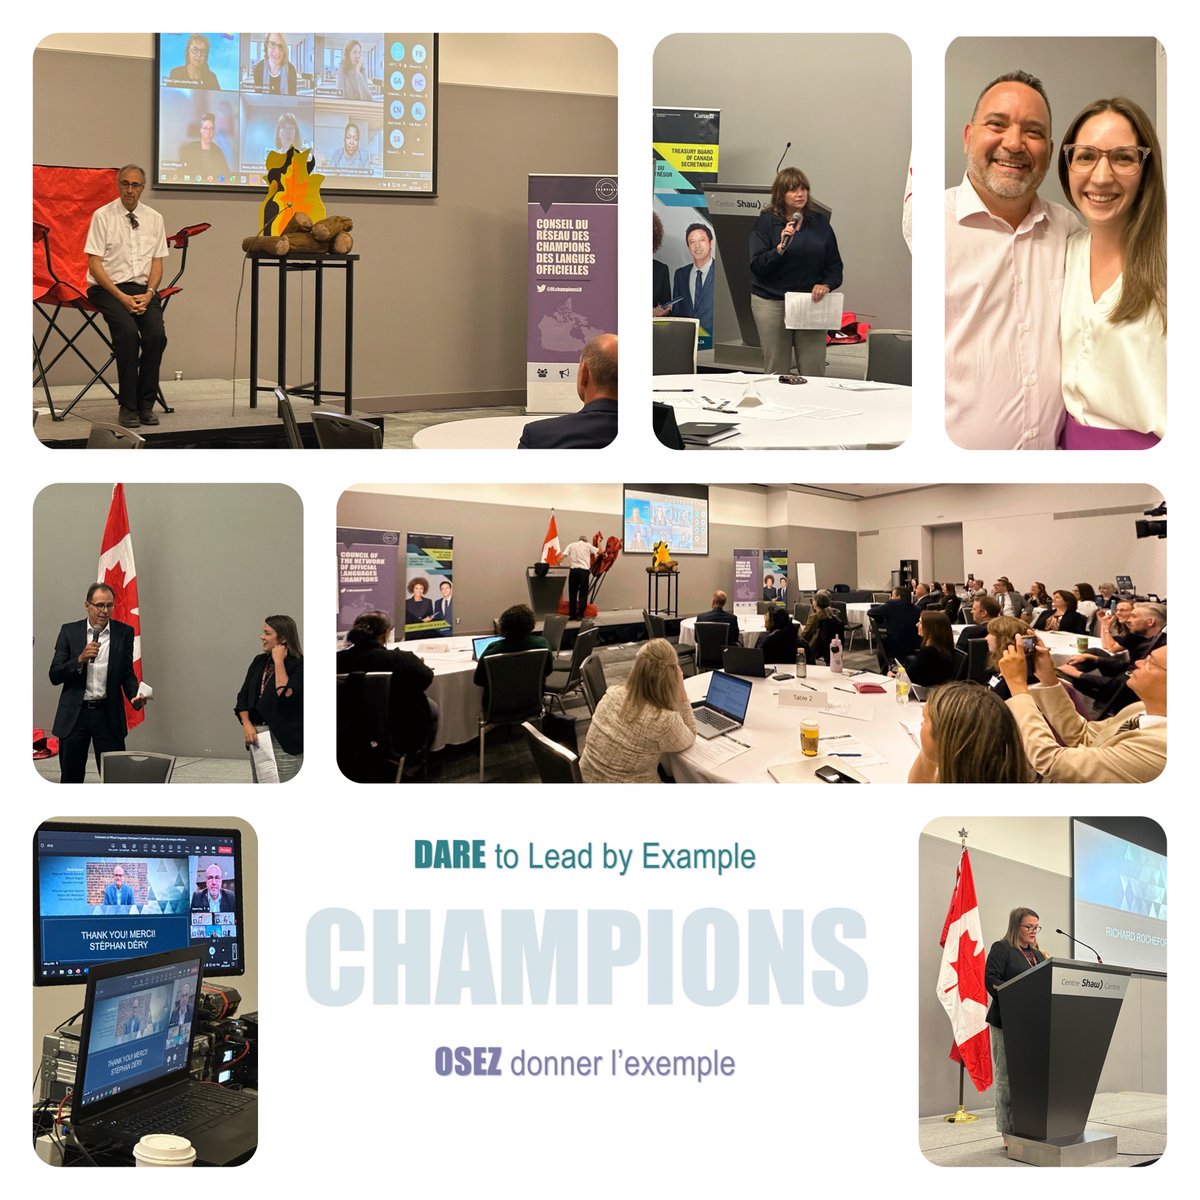 Over an hundred Leaders from across the country had the opportunity to met and exchange ideas at the 2023 Conference of Official Languages Champions.
Thank you all for your valuable participation!
#ollo #leadership #olchampionslo #officiallanguages #Leaders #osezdare